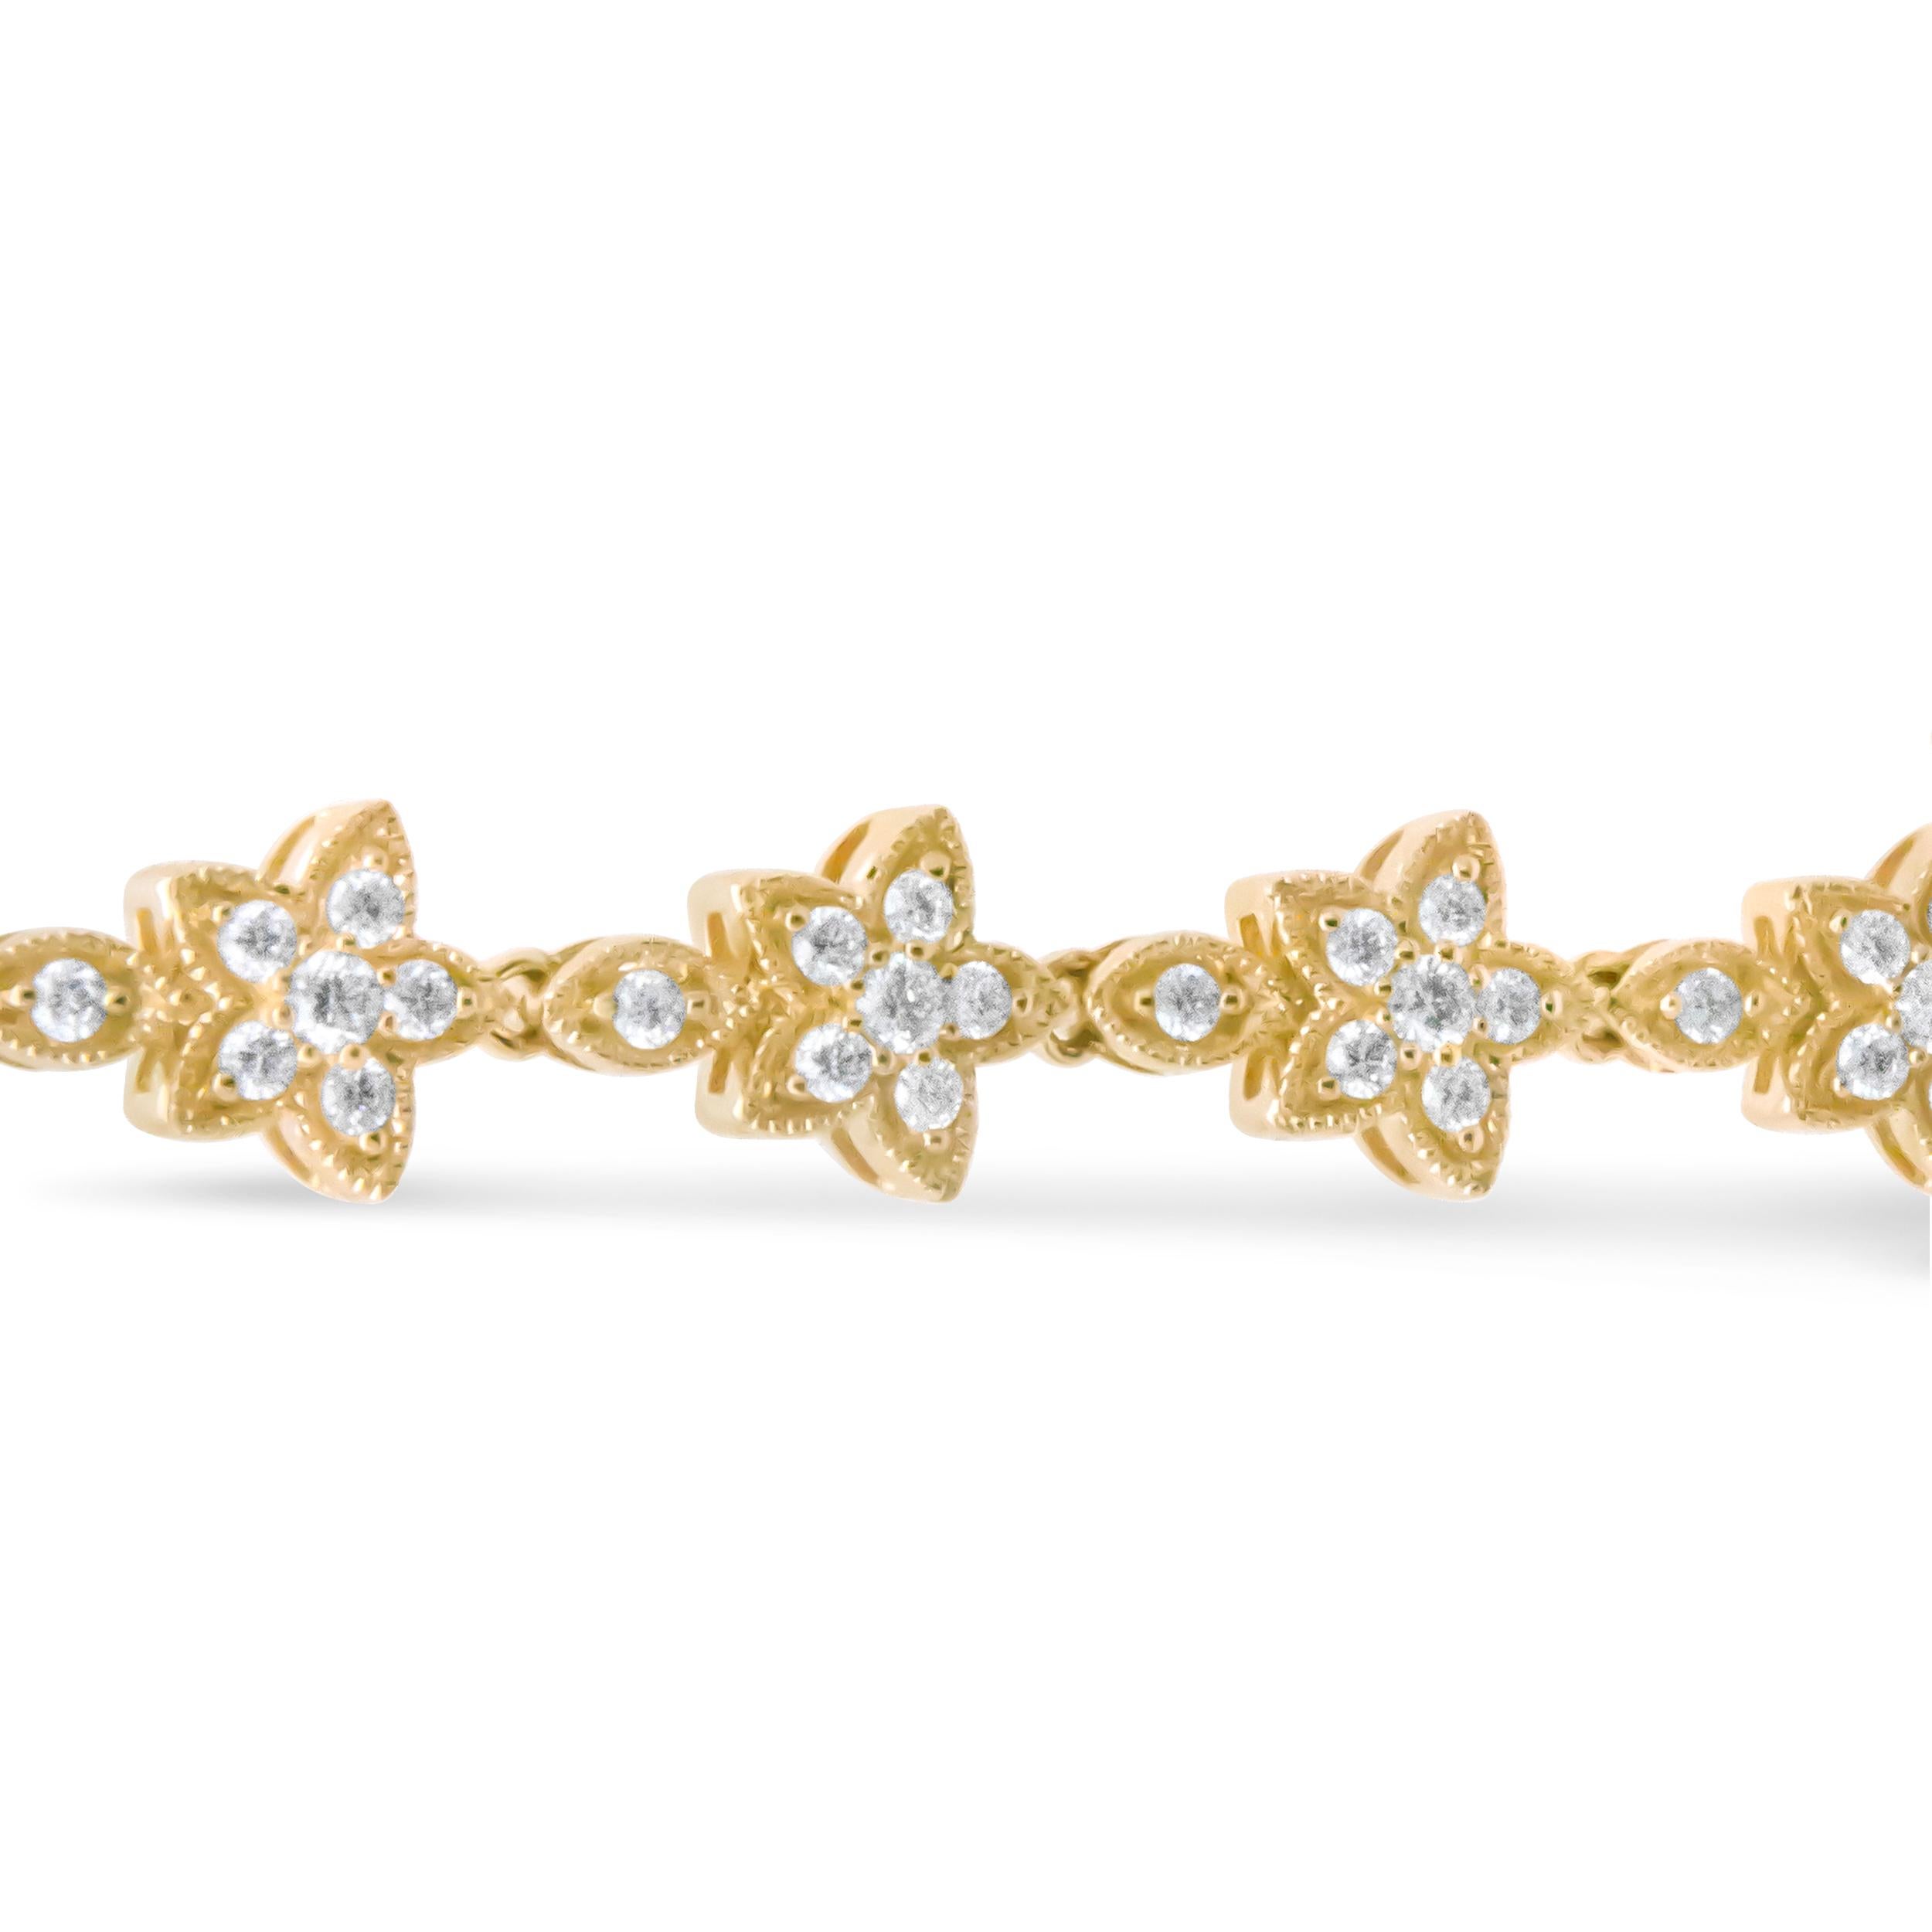 14K Yellow Gold 1 1/5 Carat Round Diamond Floral Star-Shaped Link Bracelet In Fair Condition For Sale In New York, NY